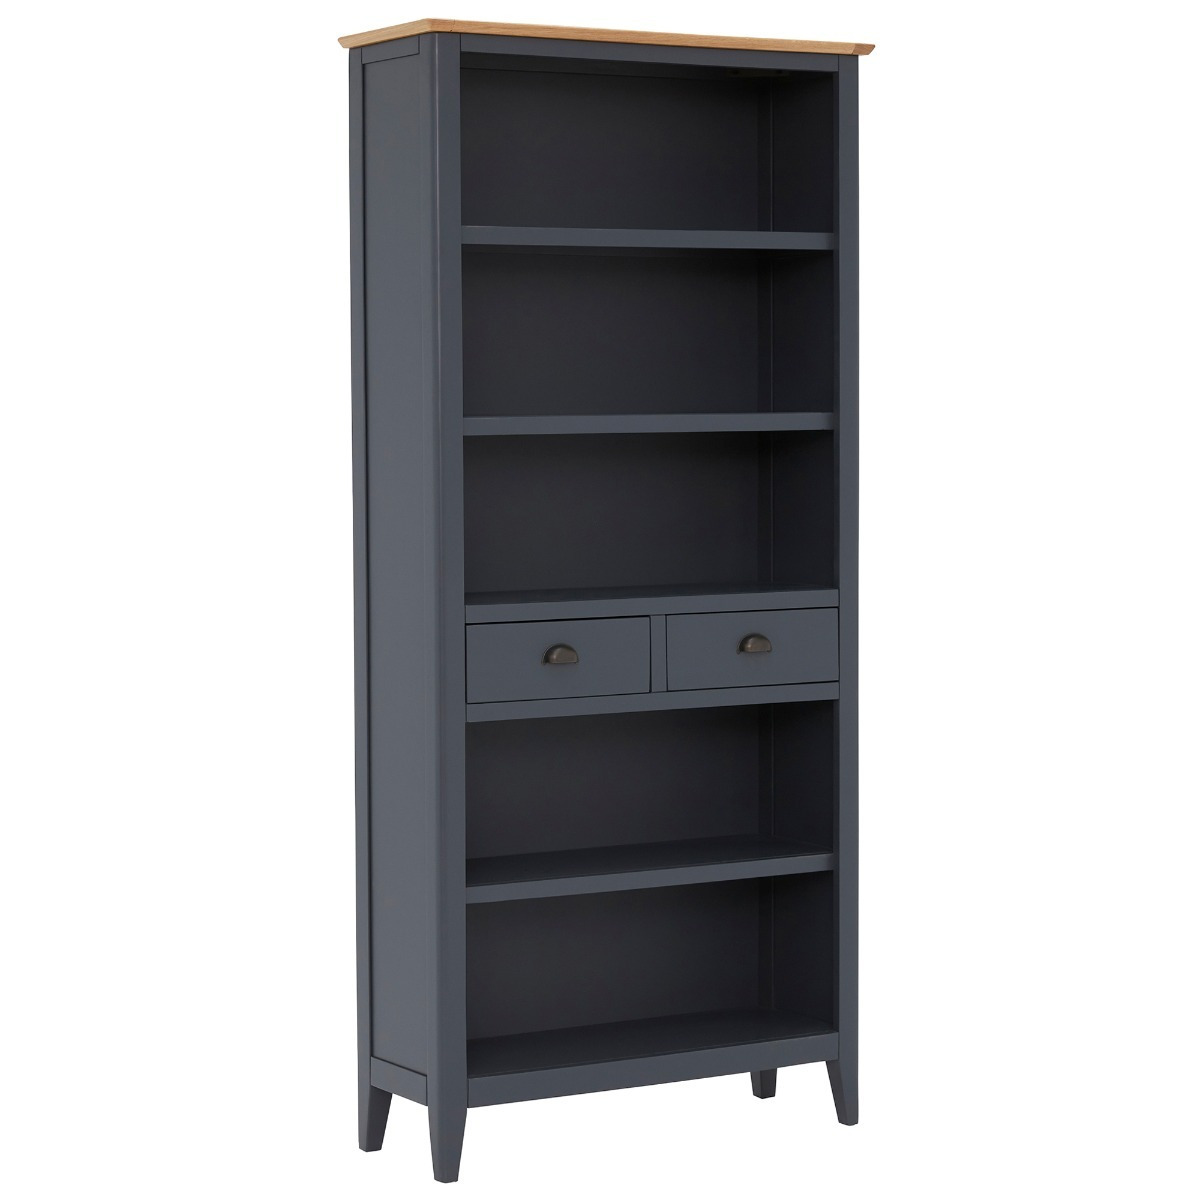 Ives Tall Bookcase With 2 Drawers, Navy Oak - Barker & Stonehouse - image 1